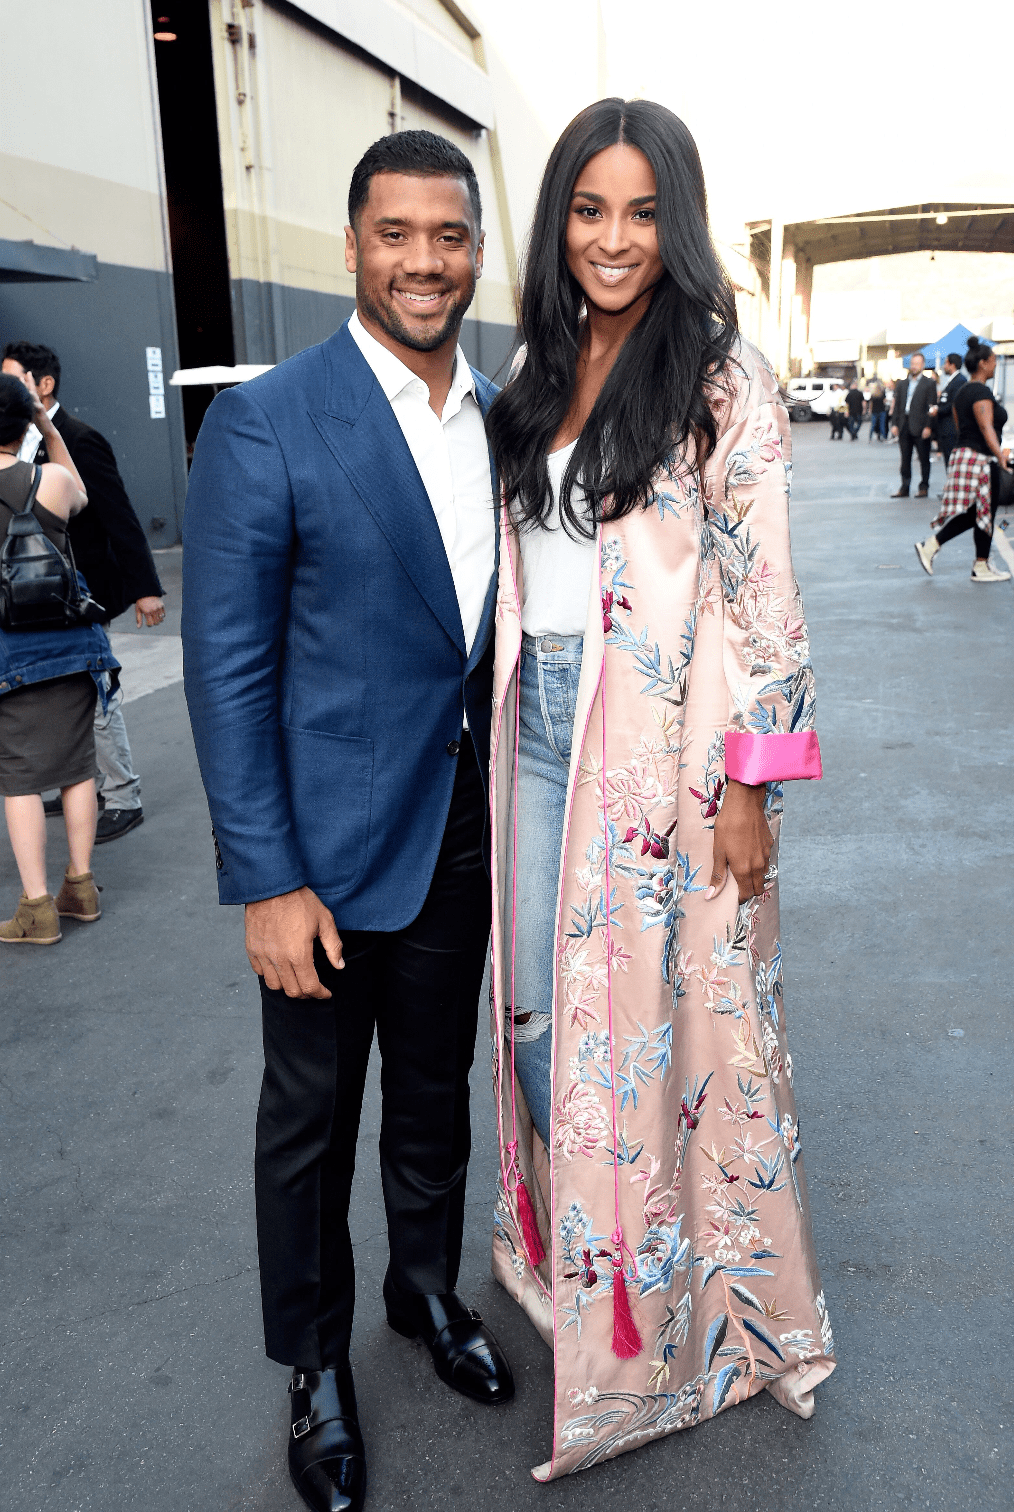 NFL player Russell Wilson and singer Ciara pose backstage during "One Voice: Somos Live! A Concert For Disaster Relief" at the Universal Studios Lot on October 14, 2017. | Source: Getty Images